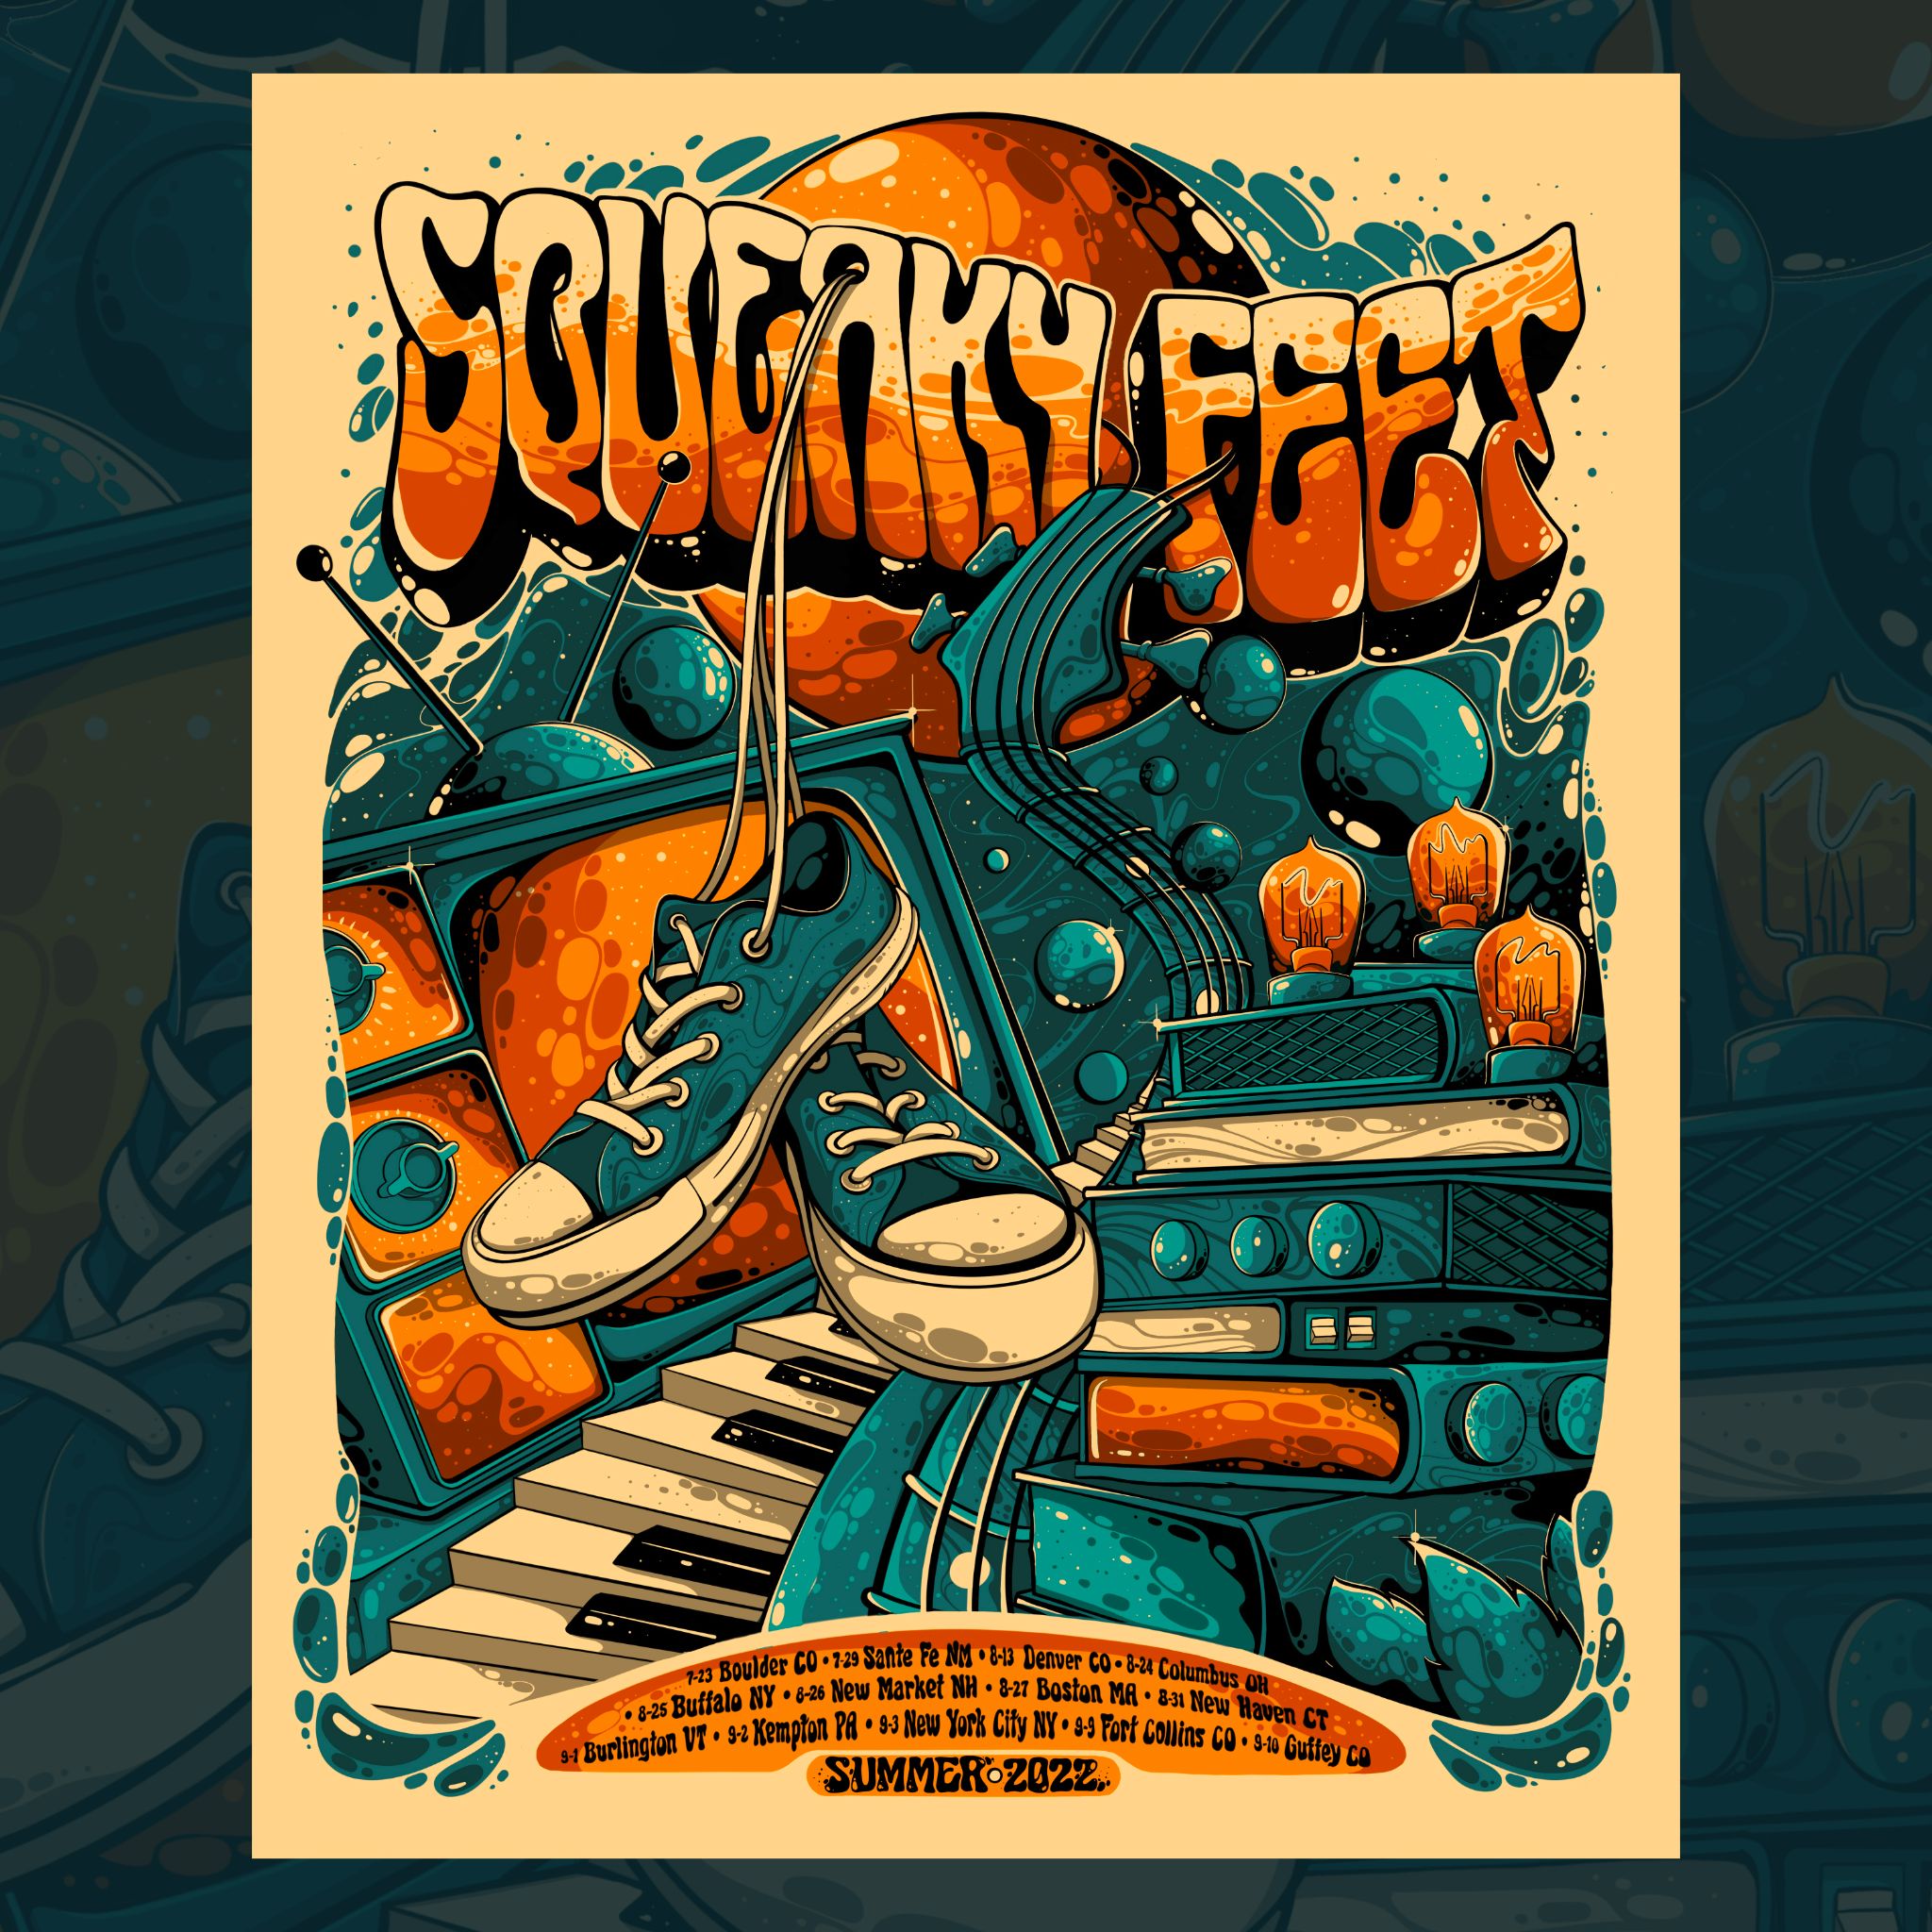 Denver, CO’s Squeaky Feet Kicks of the Northeast Tour at Summit Music Hall